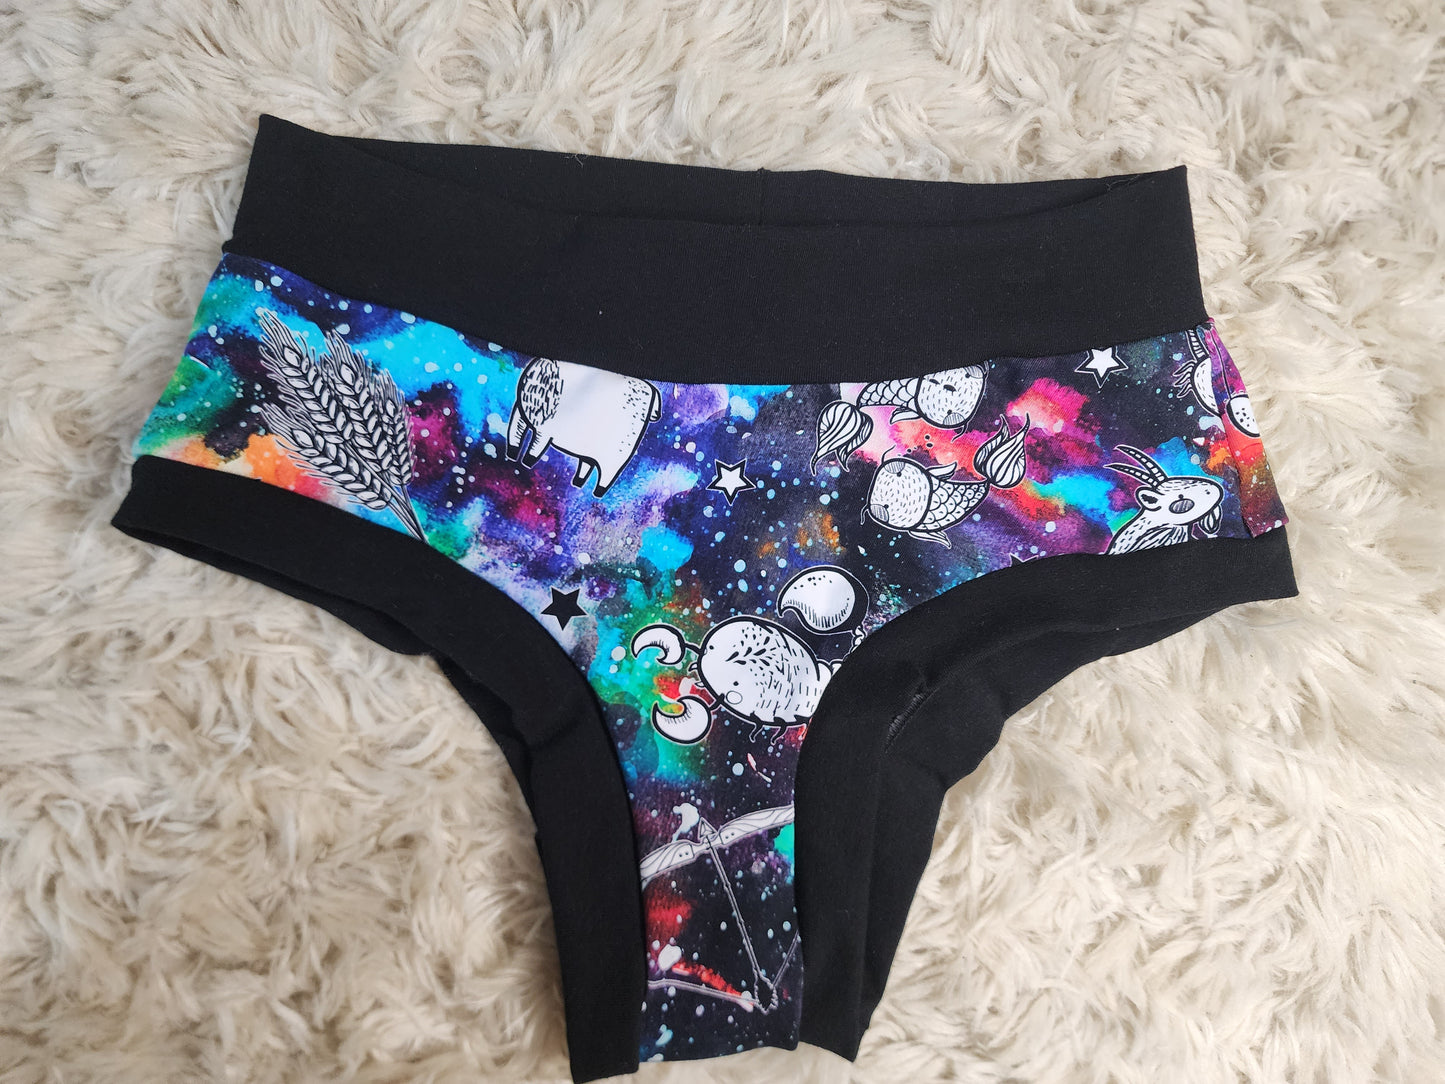 Small. Astrological super booty undies